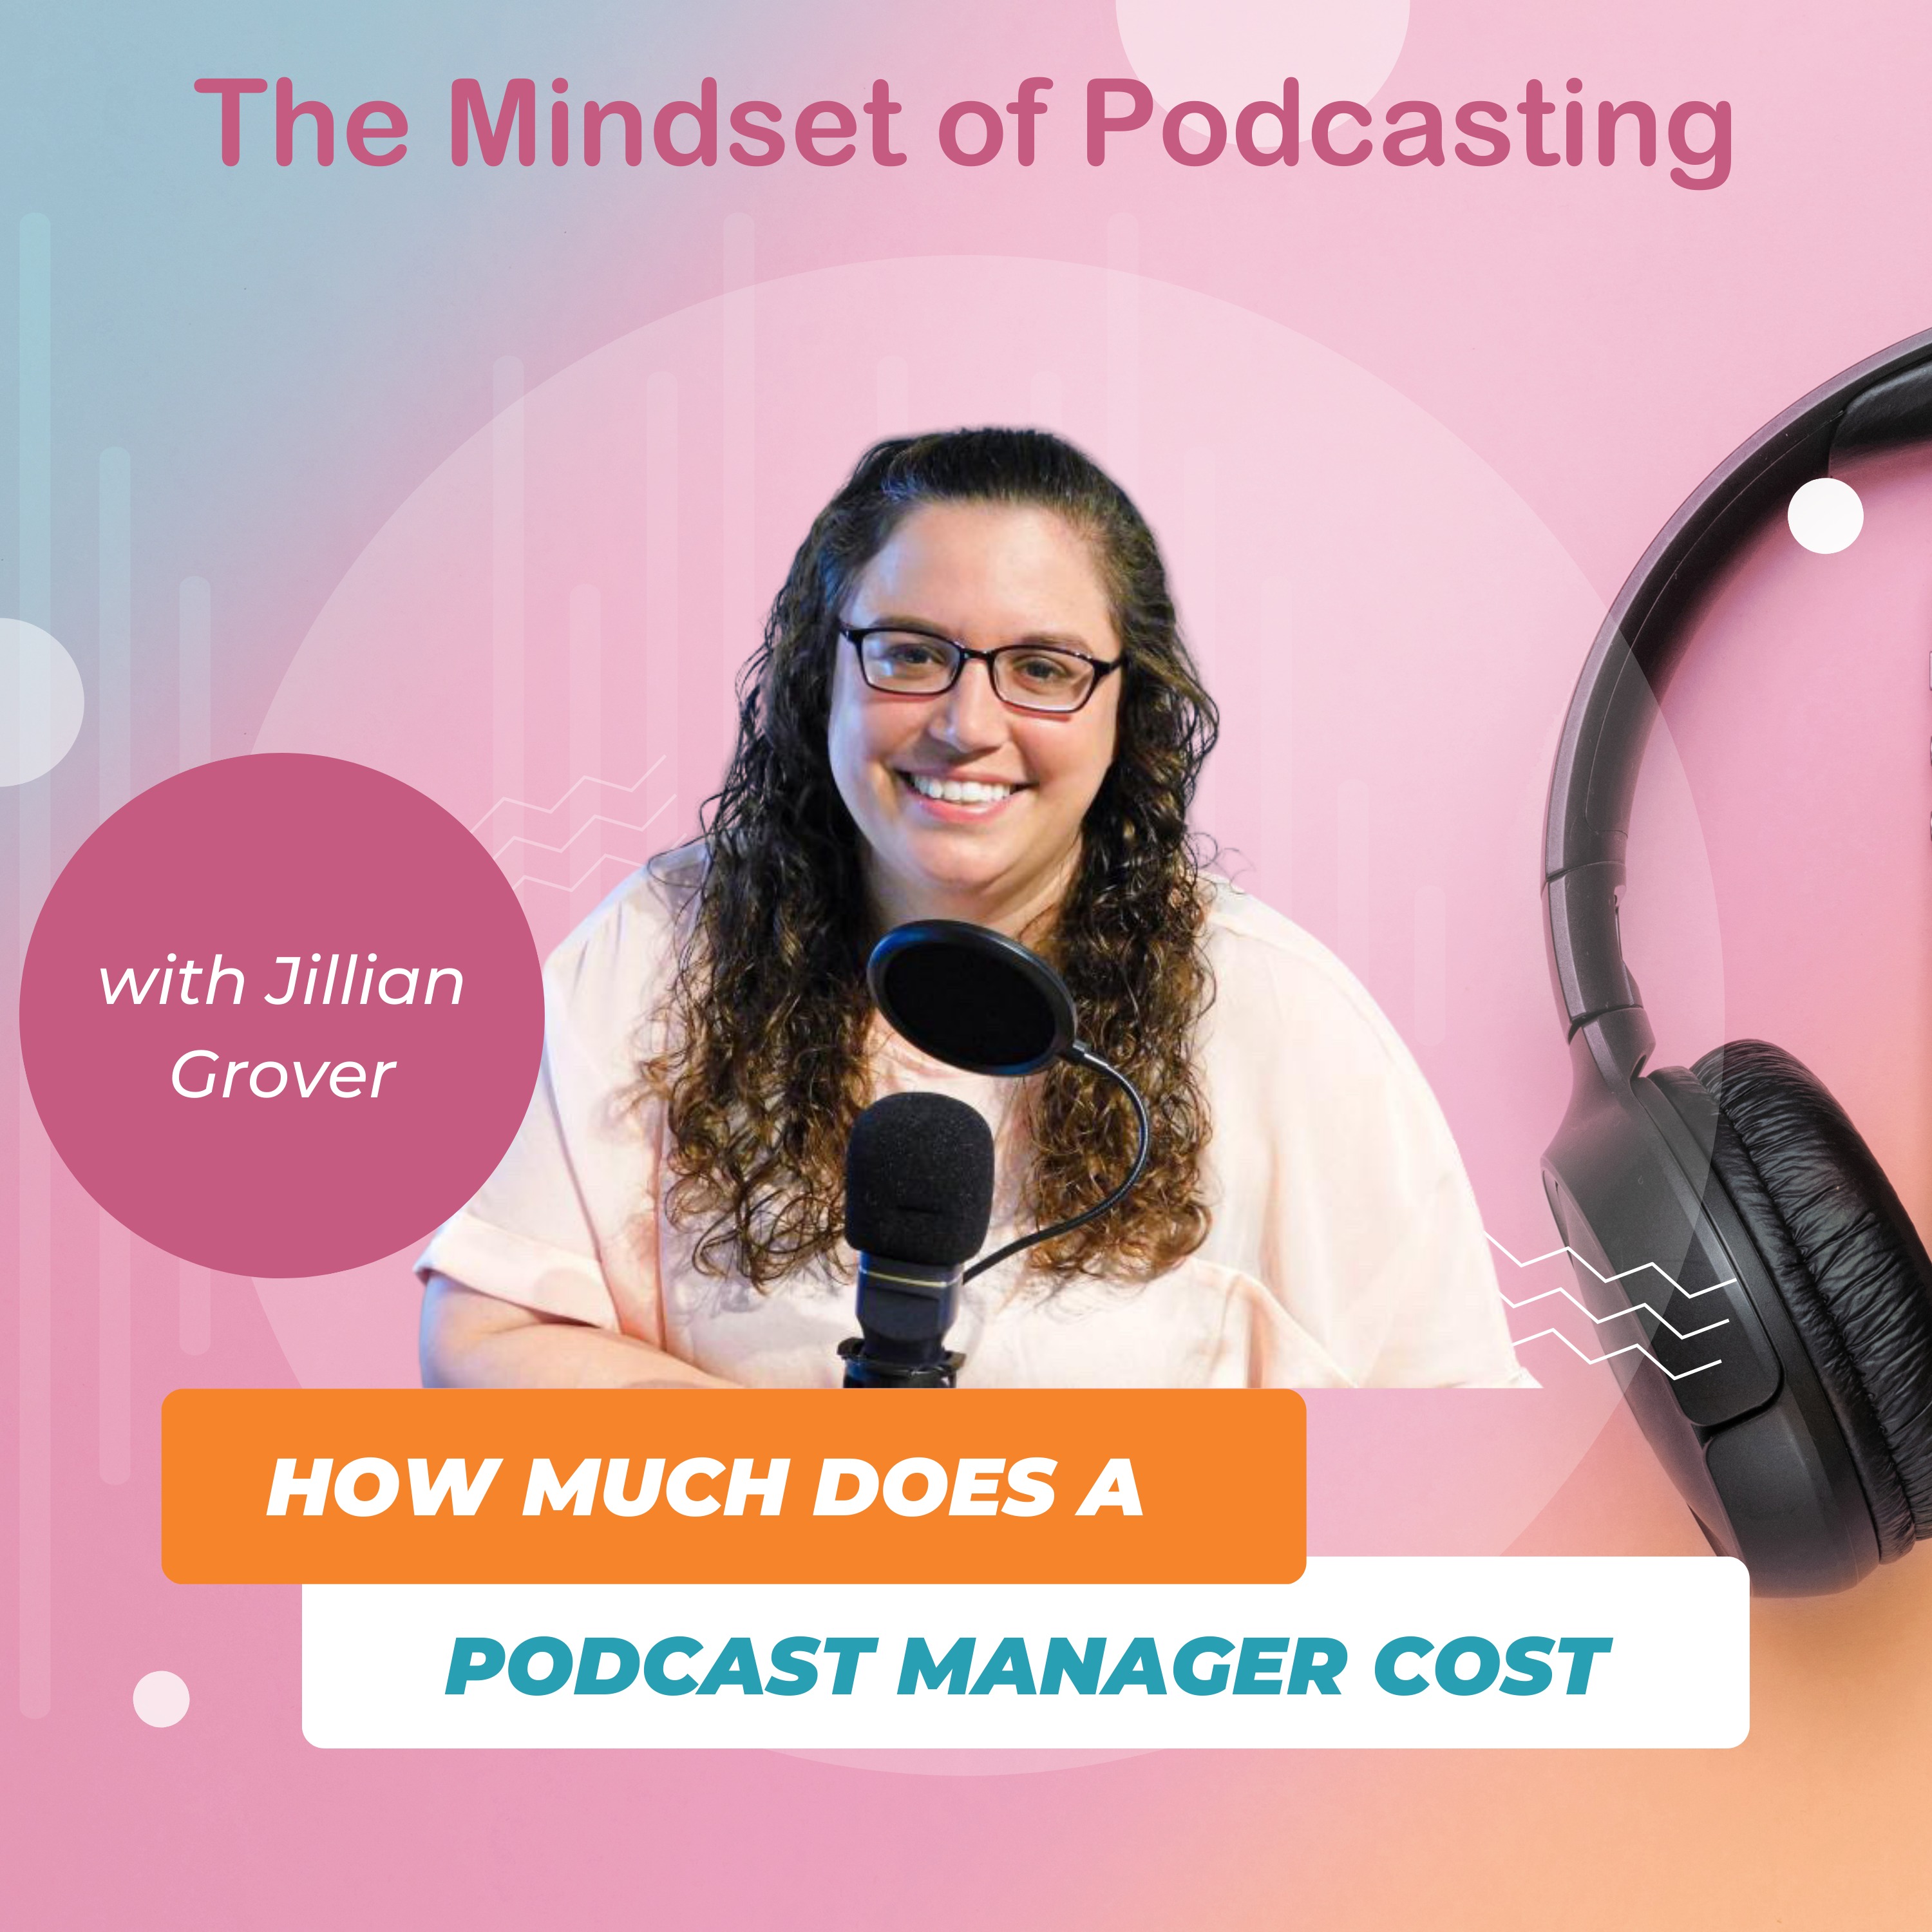 How Much Does a Podcast Manager Cost? Image